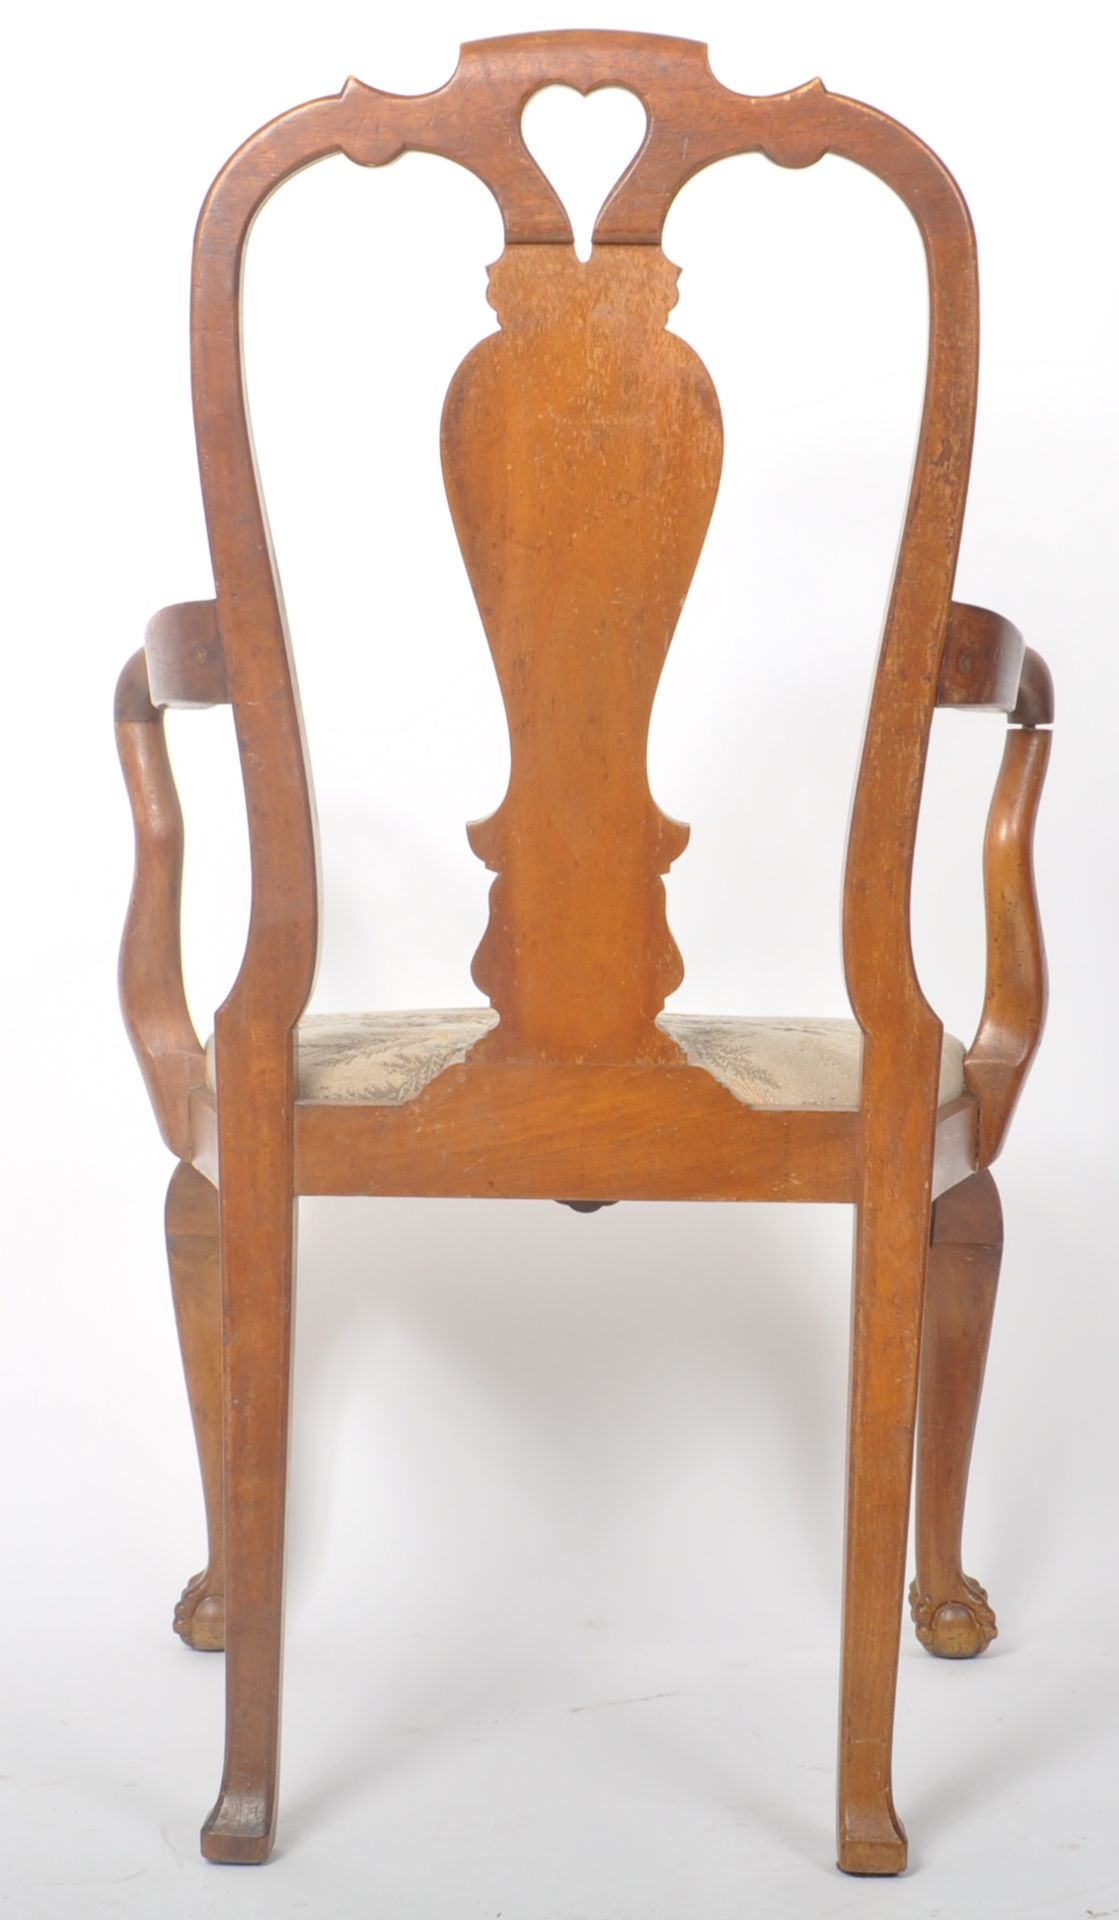 EARLY 19TH CENTURY CARVED WALNUT CARVER ARMCHAIR - Image 8 of 8